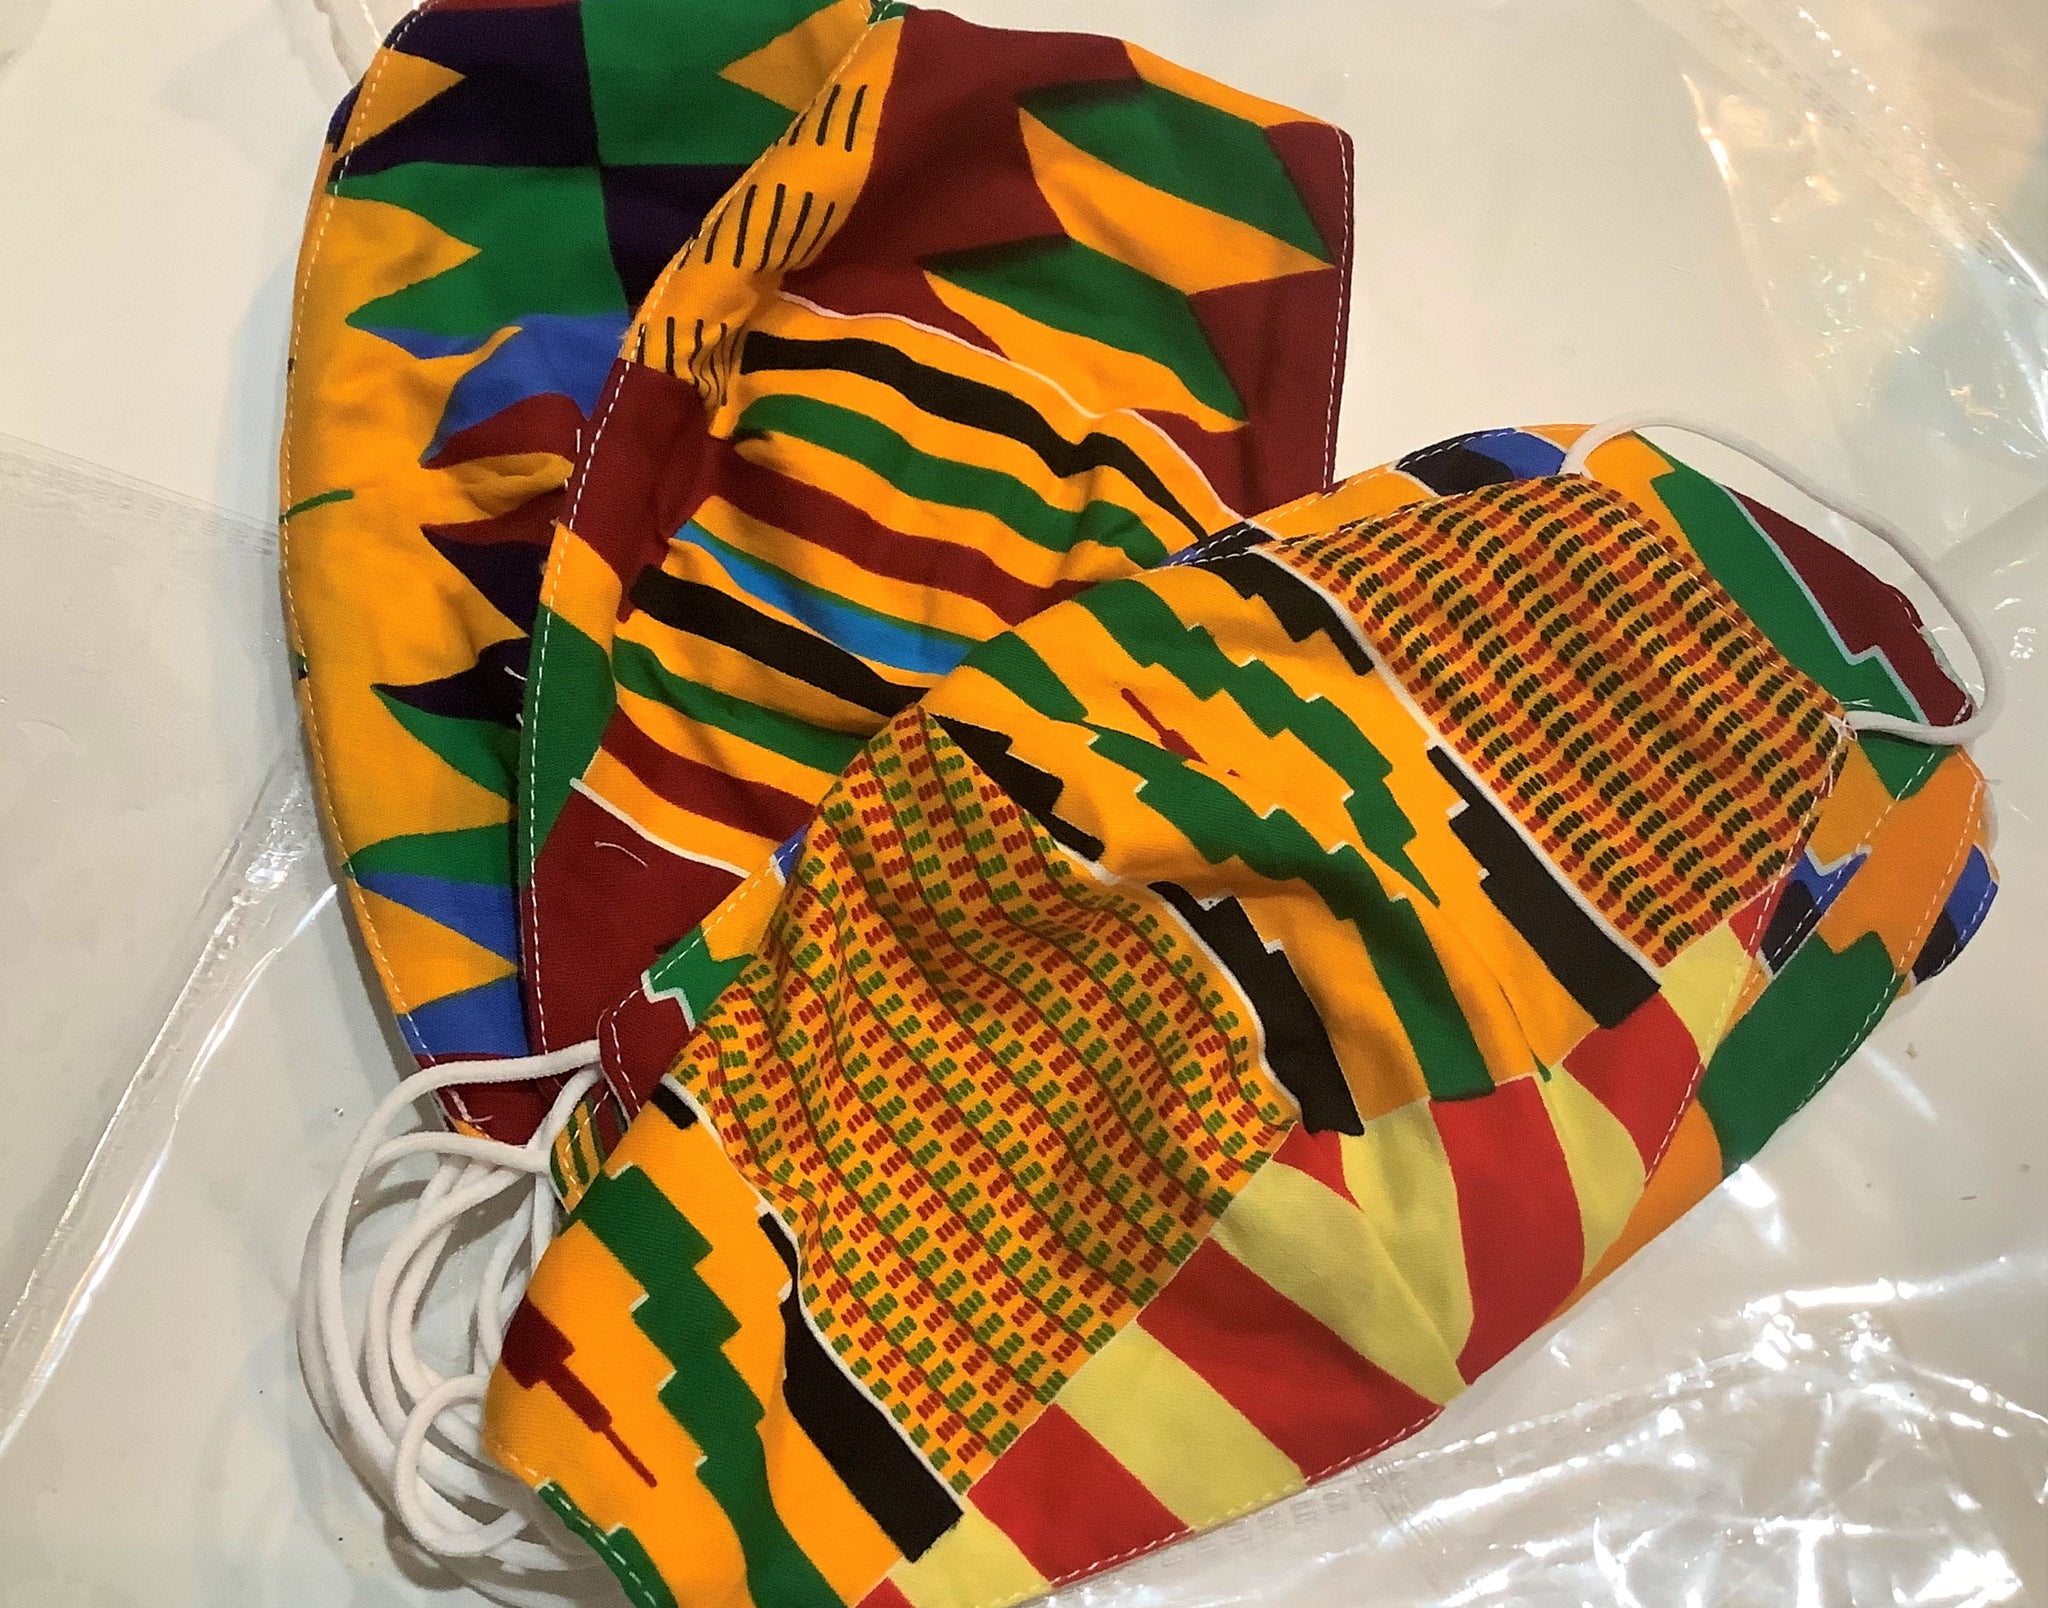 African Style Facemasks- Buy 5 for $20